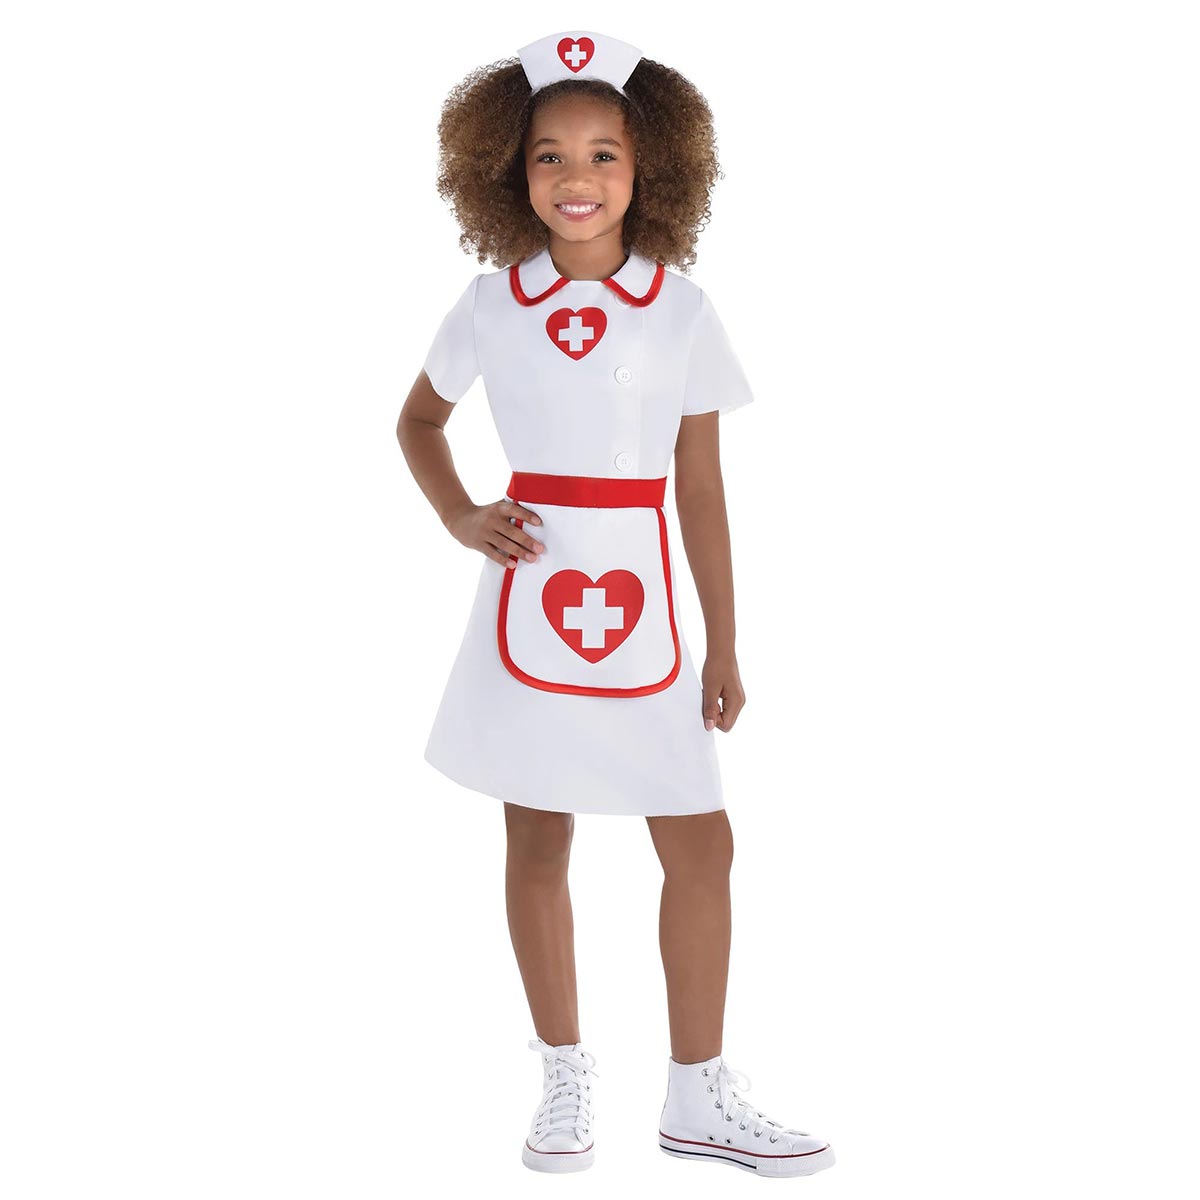 Sweetheart Nurse Costume for Kids, White and Red Dress – Party Expert